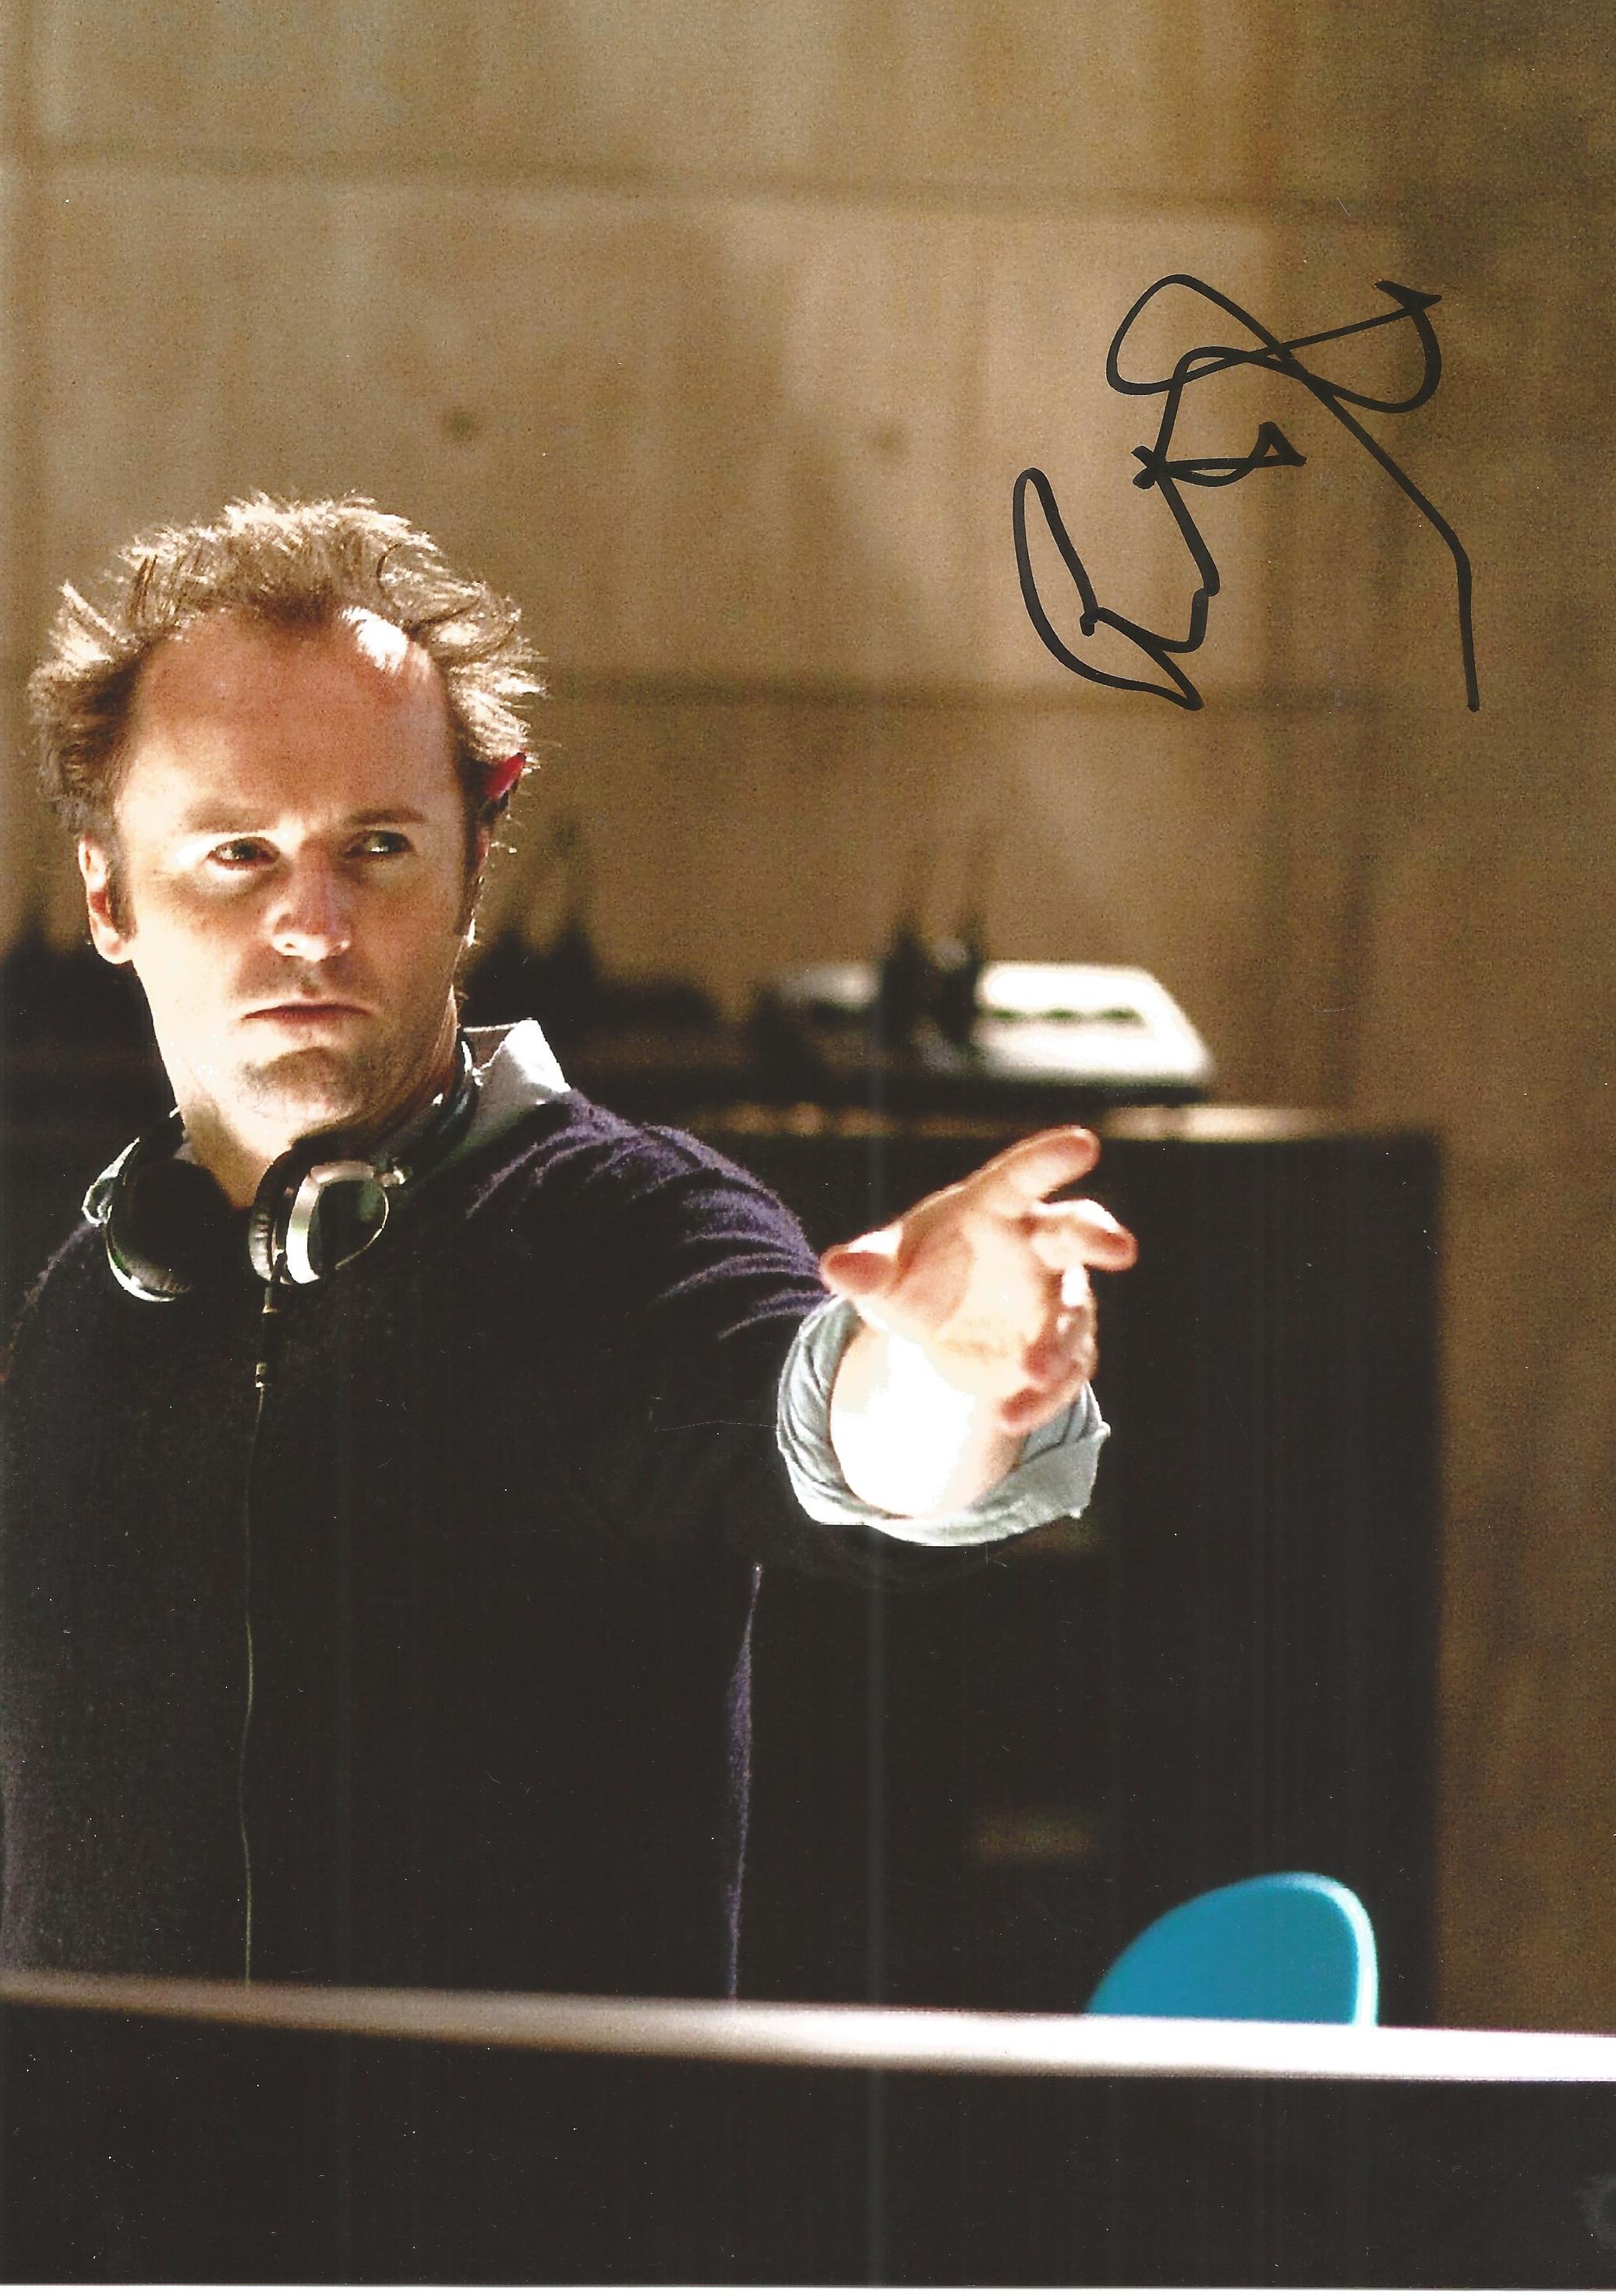 Rupert Wyatt Signed 10 x 8 inch Colour Photo. Good condition. All autographs come with a Certificate